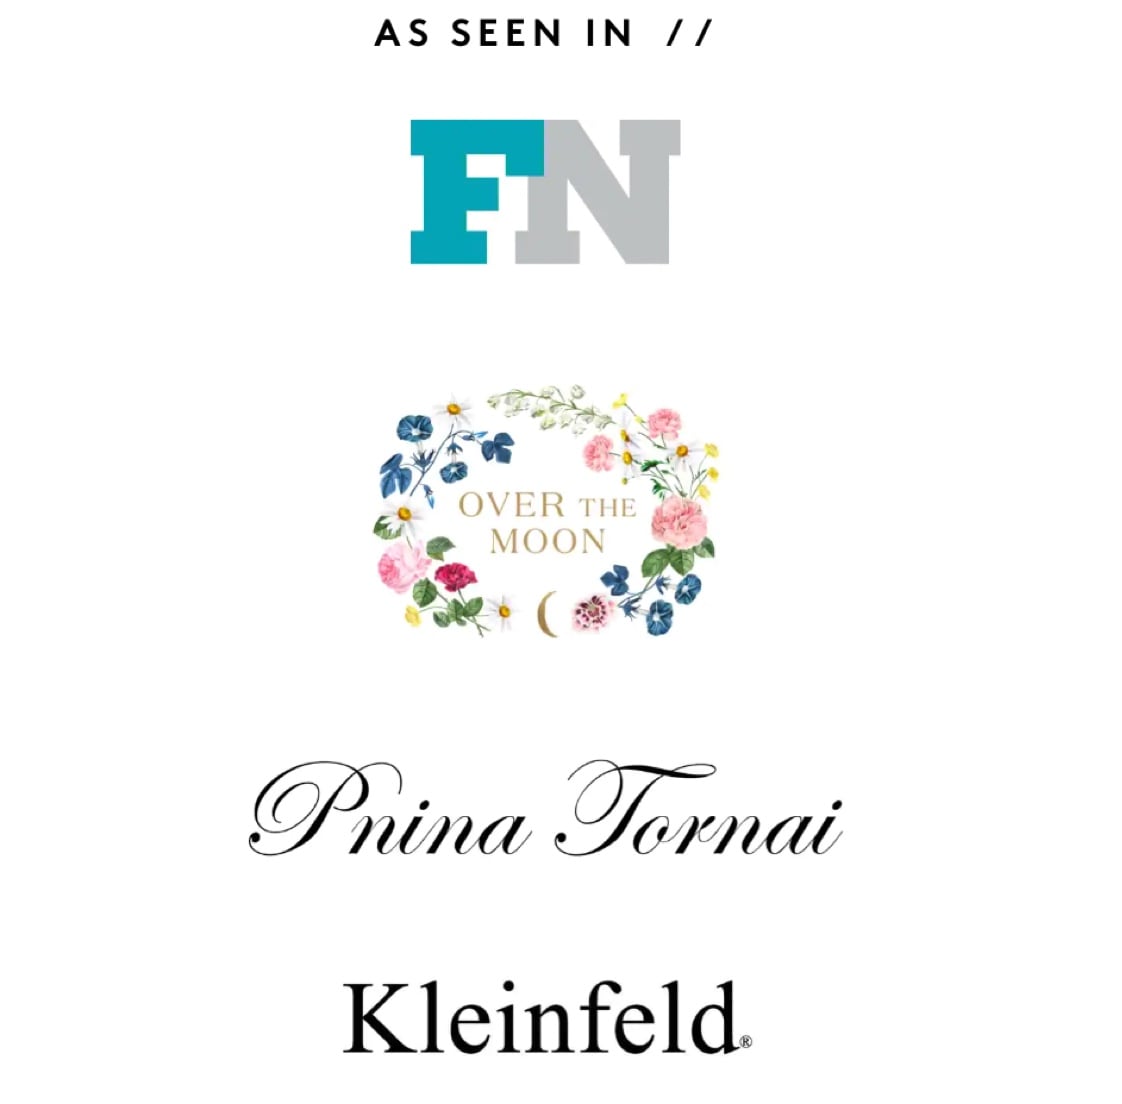 as seen in footwear news, over the moon, pnina tornai and kleinfeld